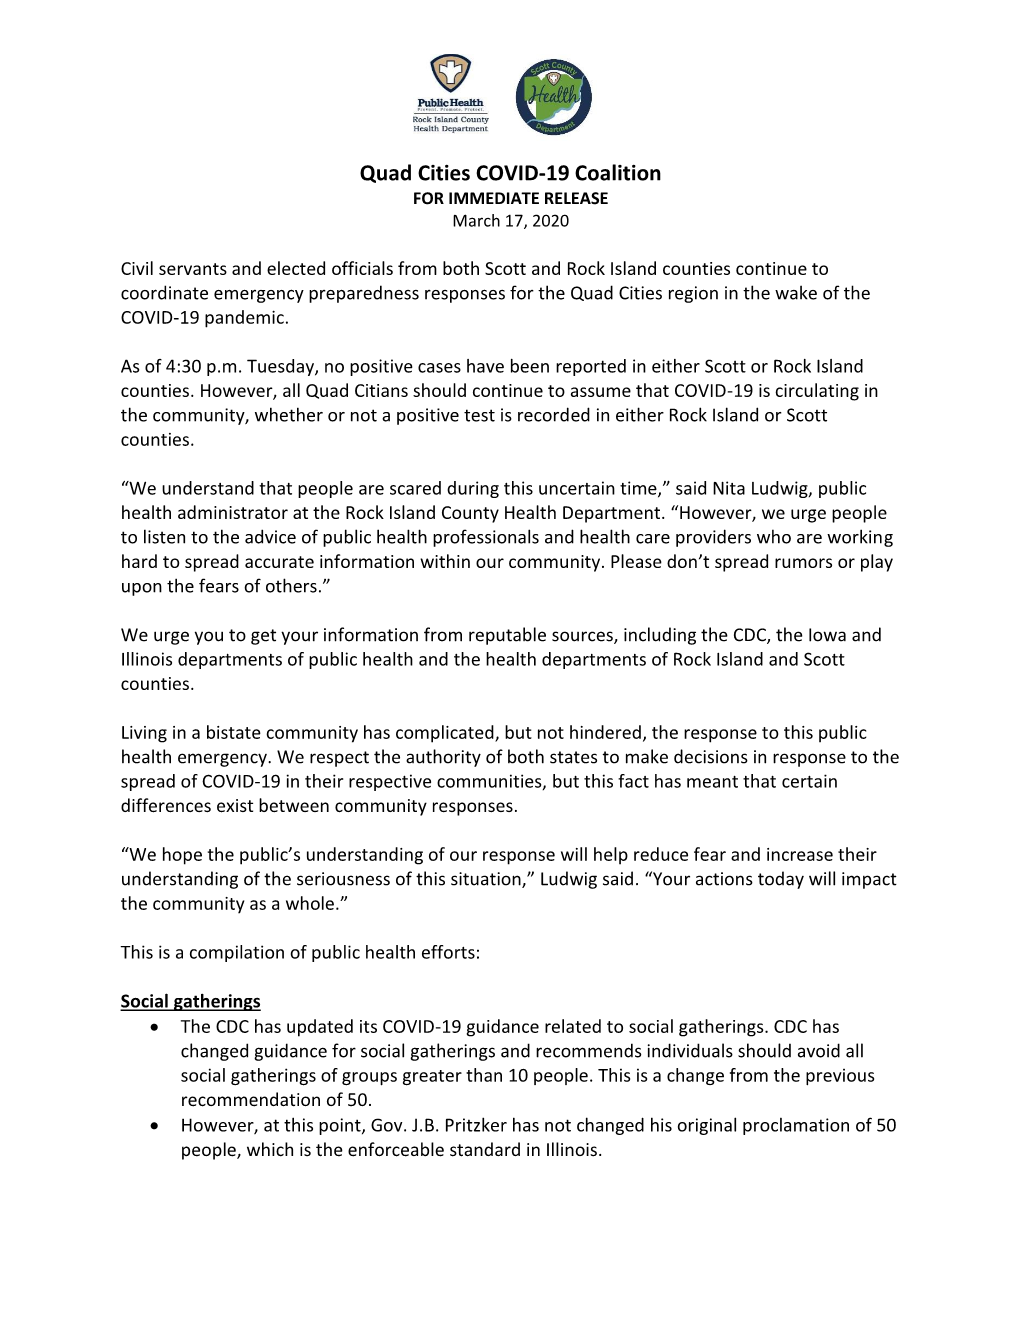 Quad Cities COVID-19 Coalition for IMMEDIATE RELEASE March 17, 2020